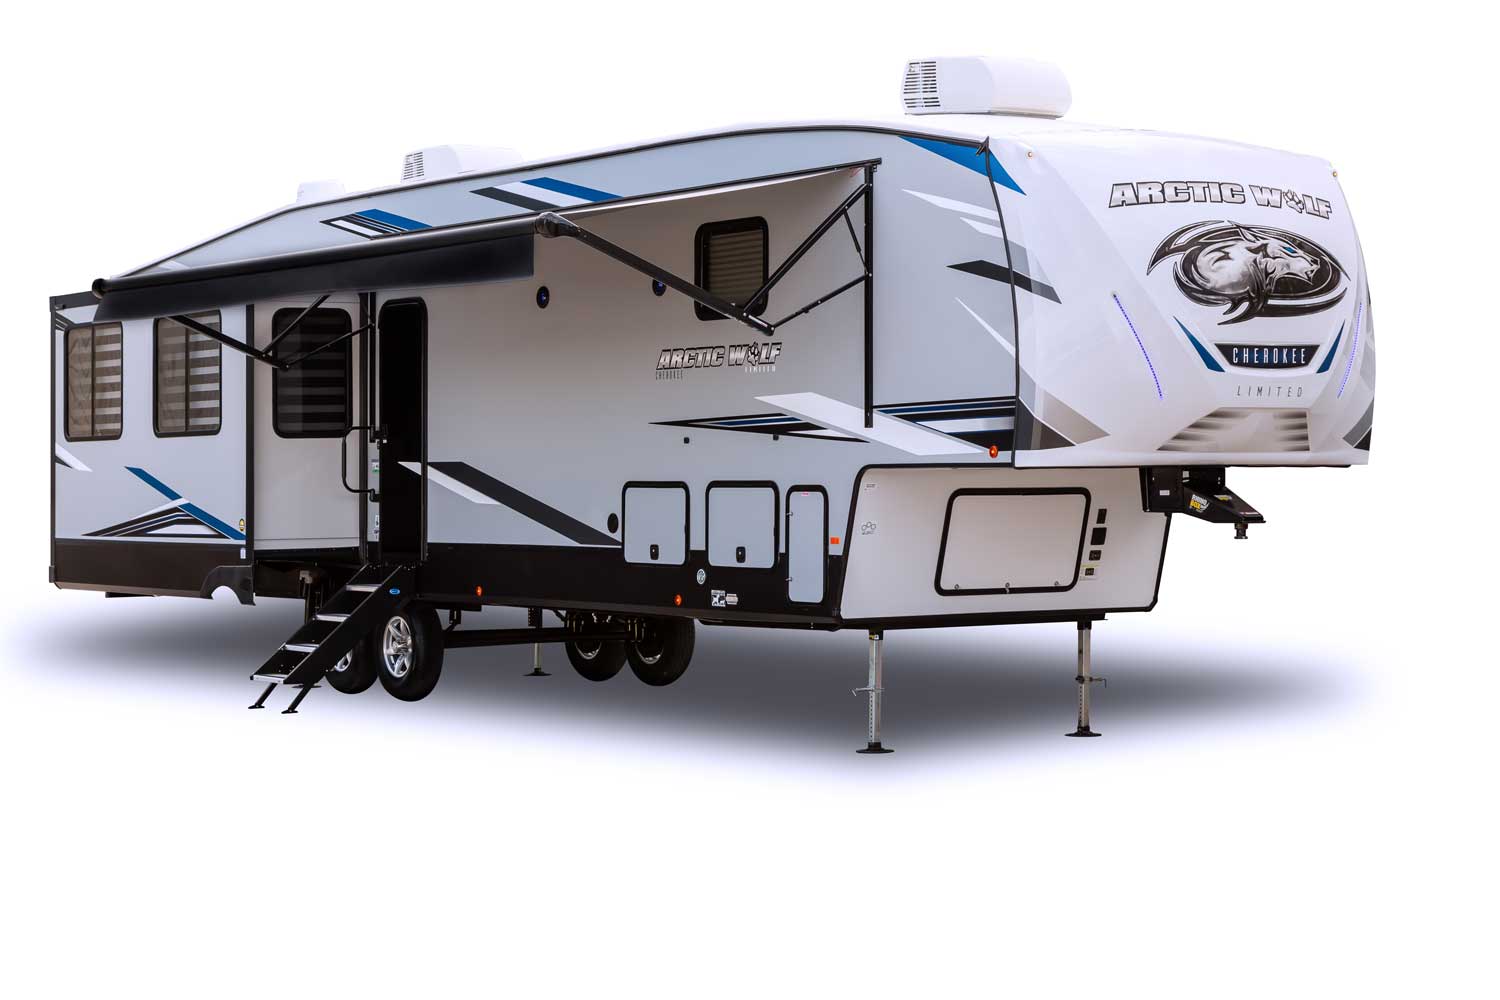 Best Cold Weather 5th Wheel Trailer For